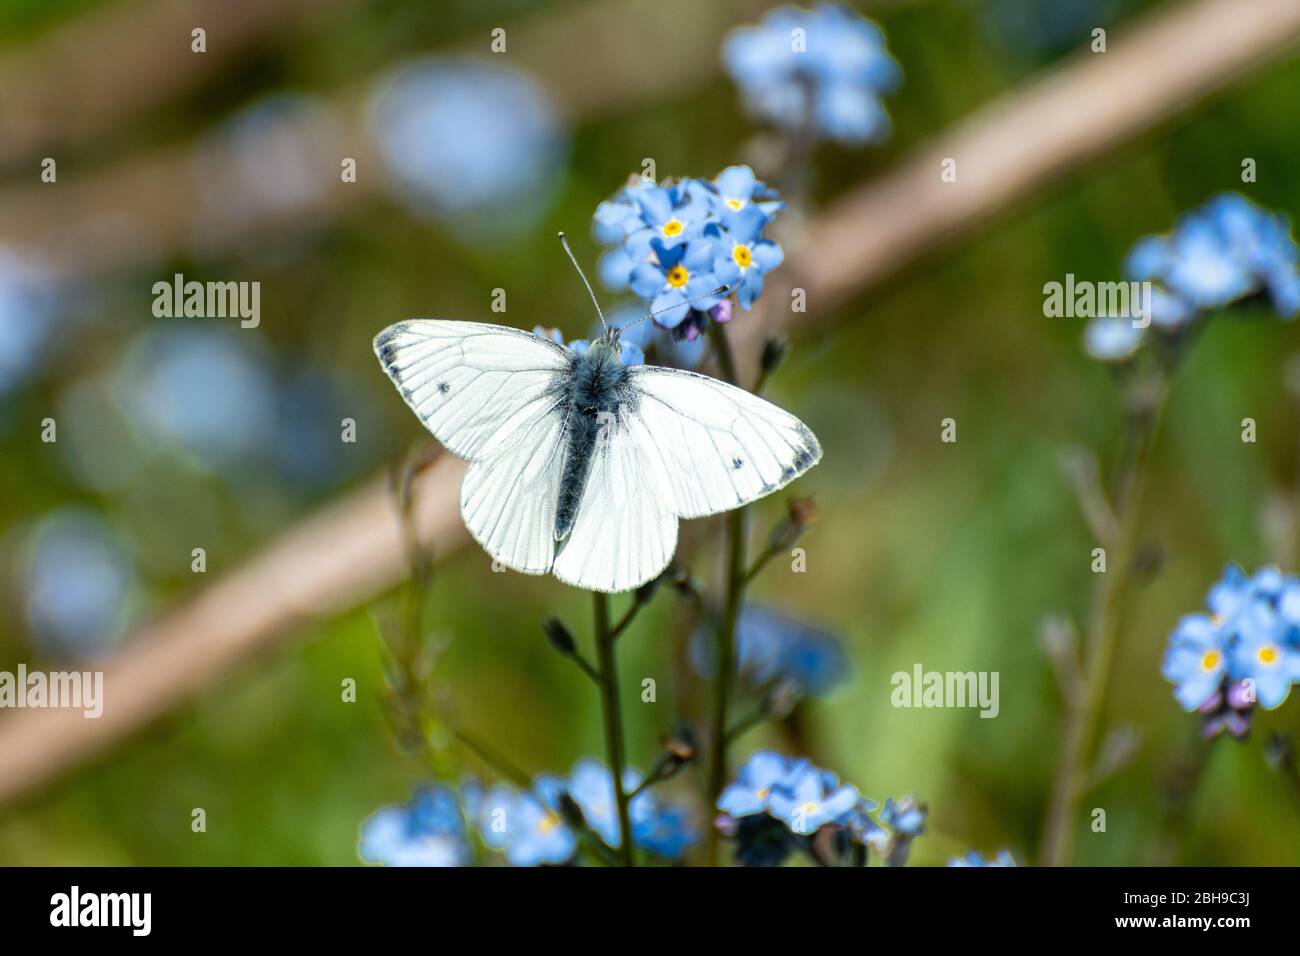 Green-veined white butterfly (Pieris napi) nectaring on a blue forget-me-not flower (Myosotis) during April, UK Stock Photo